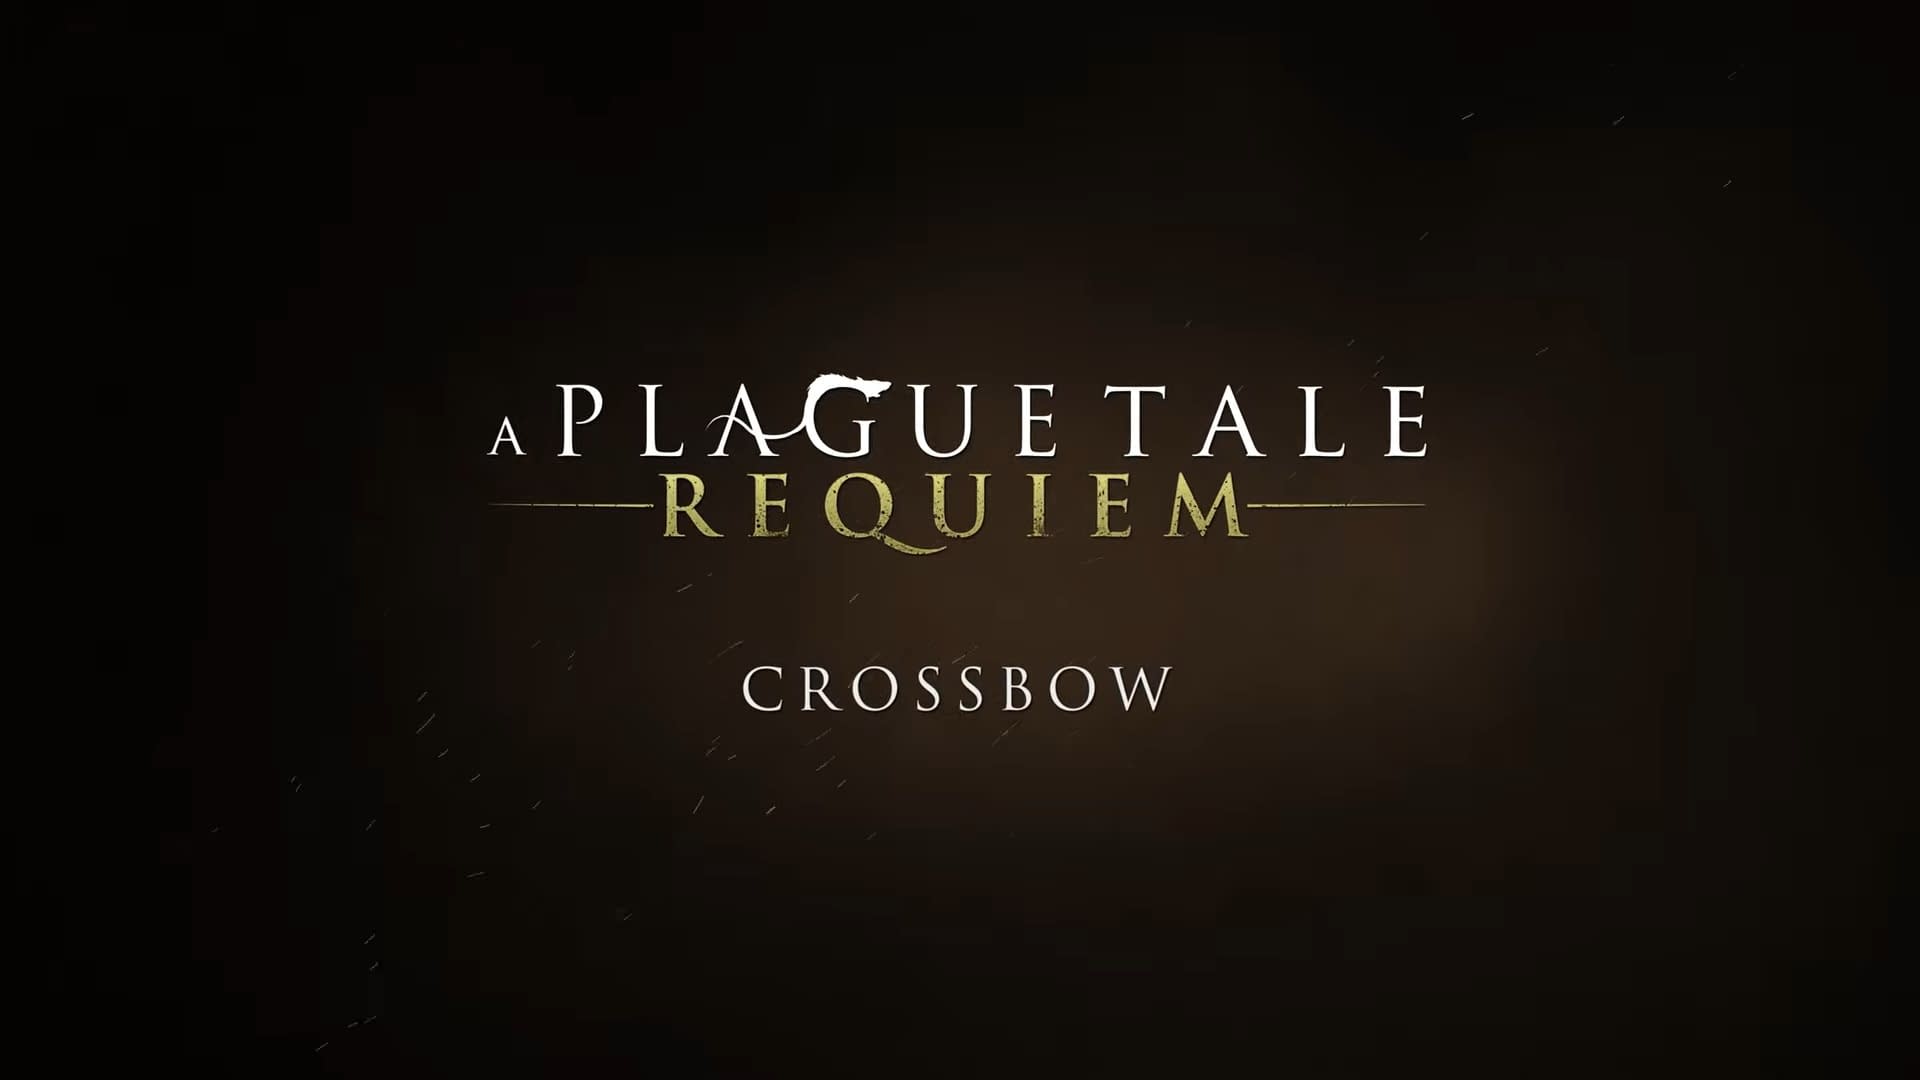 Crossbow Gameplay Trailer for A Plague Tale: Requiem Released